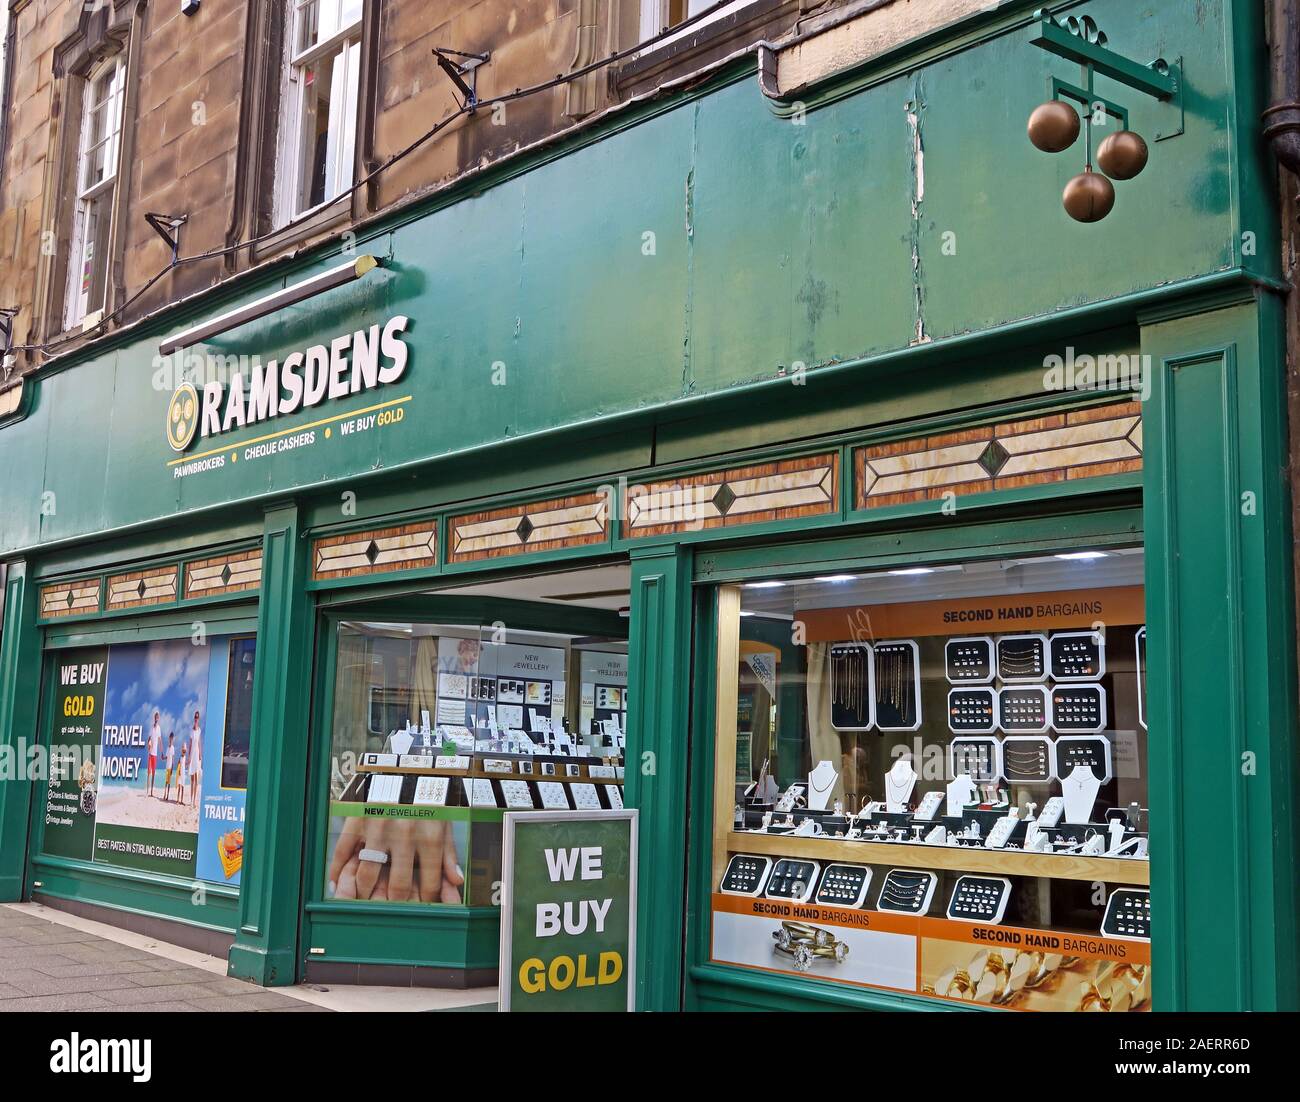 Ramsdens pawnbroker, Cheque cashers, We Buy Gold, 9-11 Murray Place, Stirling,Scotland,UK, FK8 Stock Photo